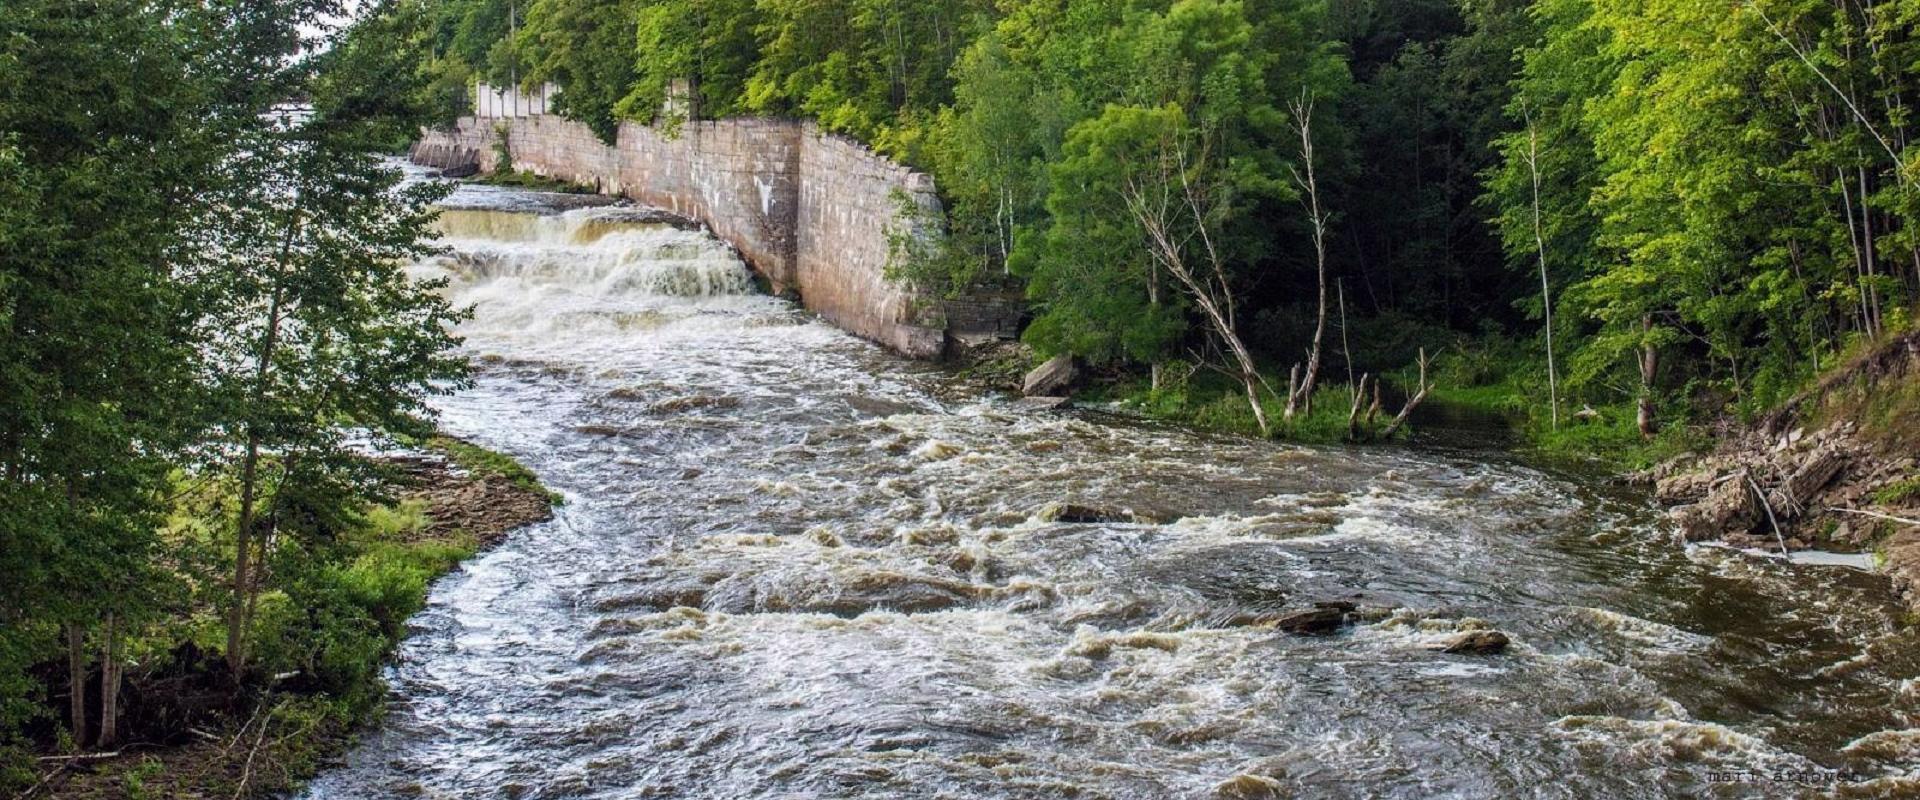 Narva cascades are located on the territory of the Kreenholm manufactory, which has ceased their operations. The hydroelectric plant releases water fr